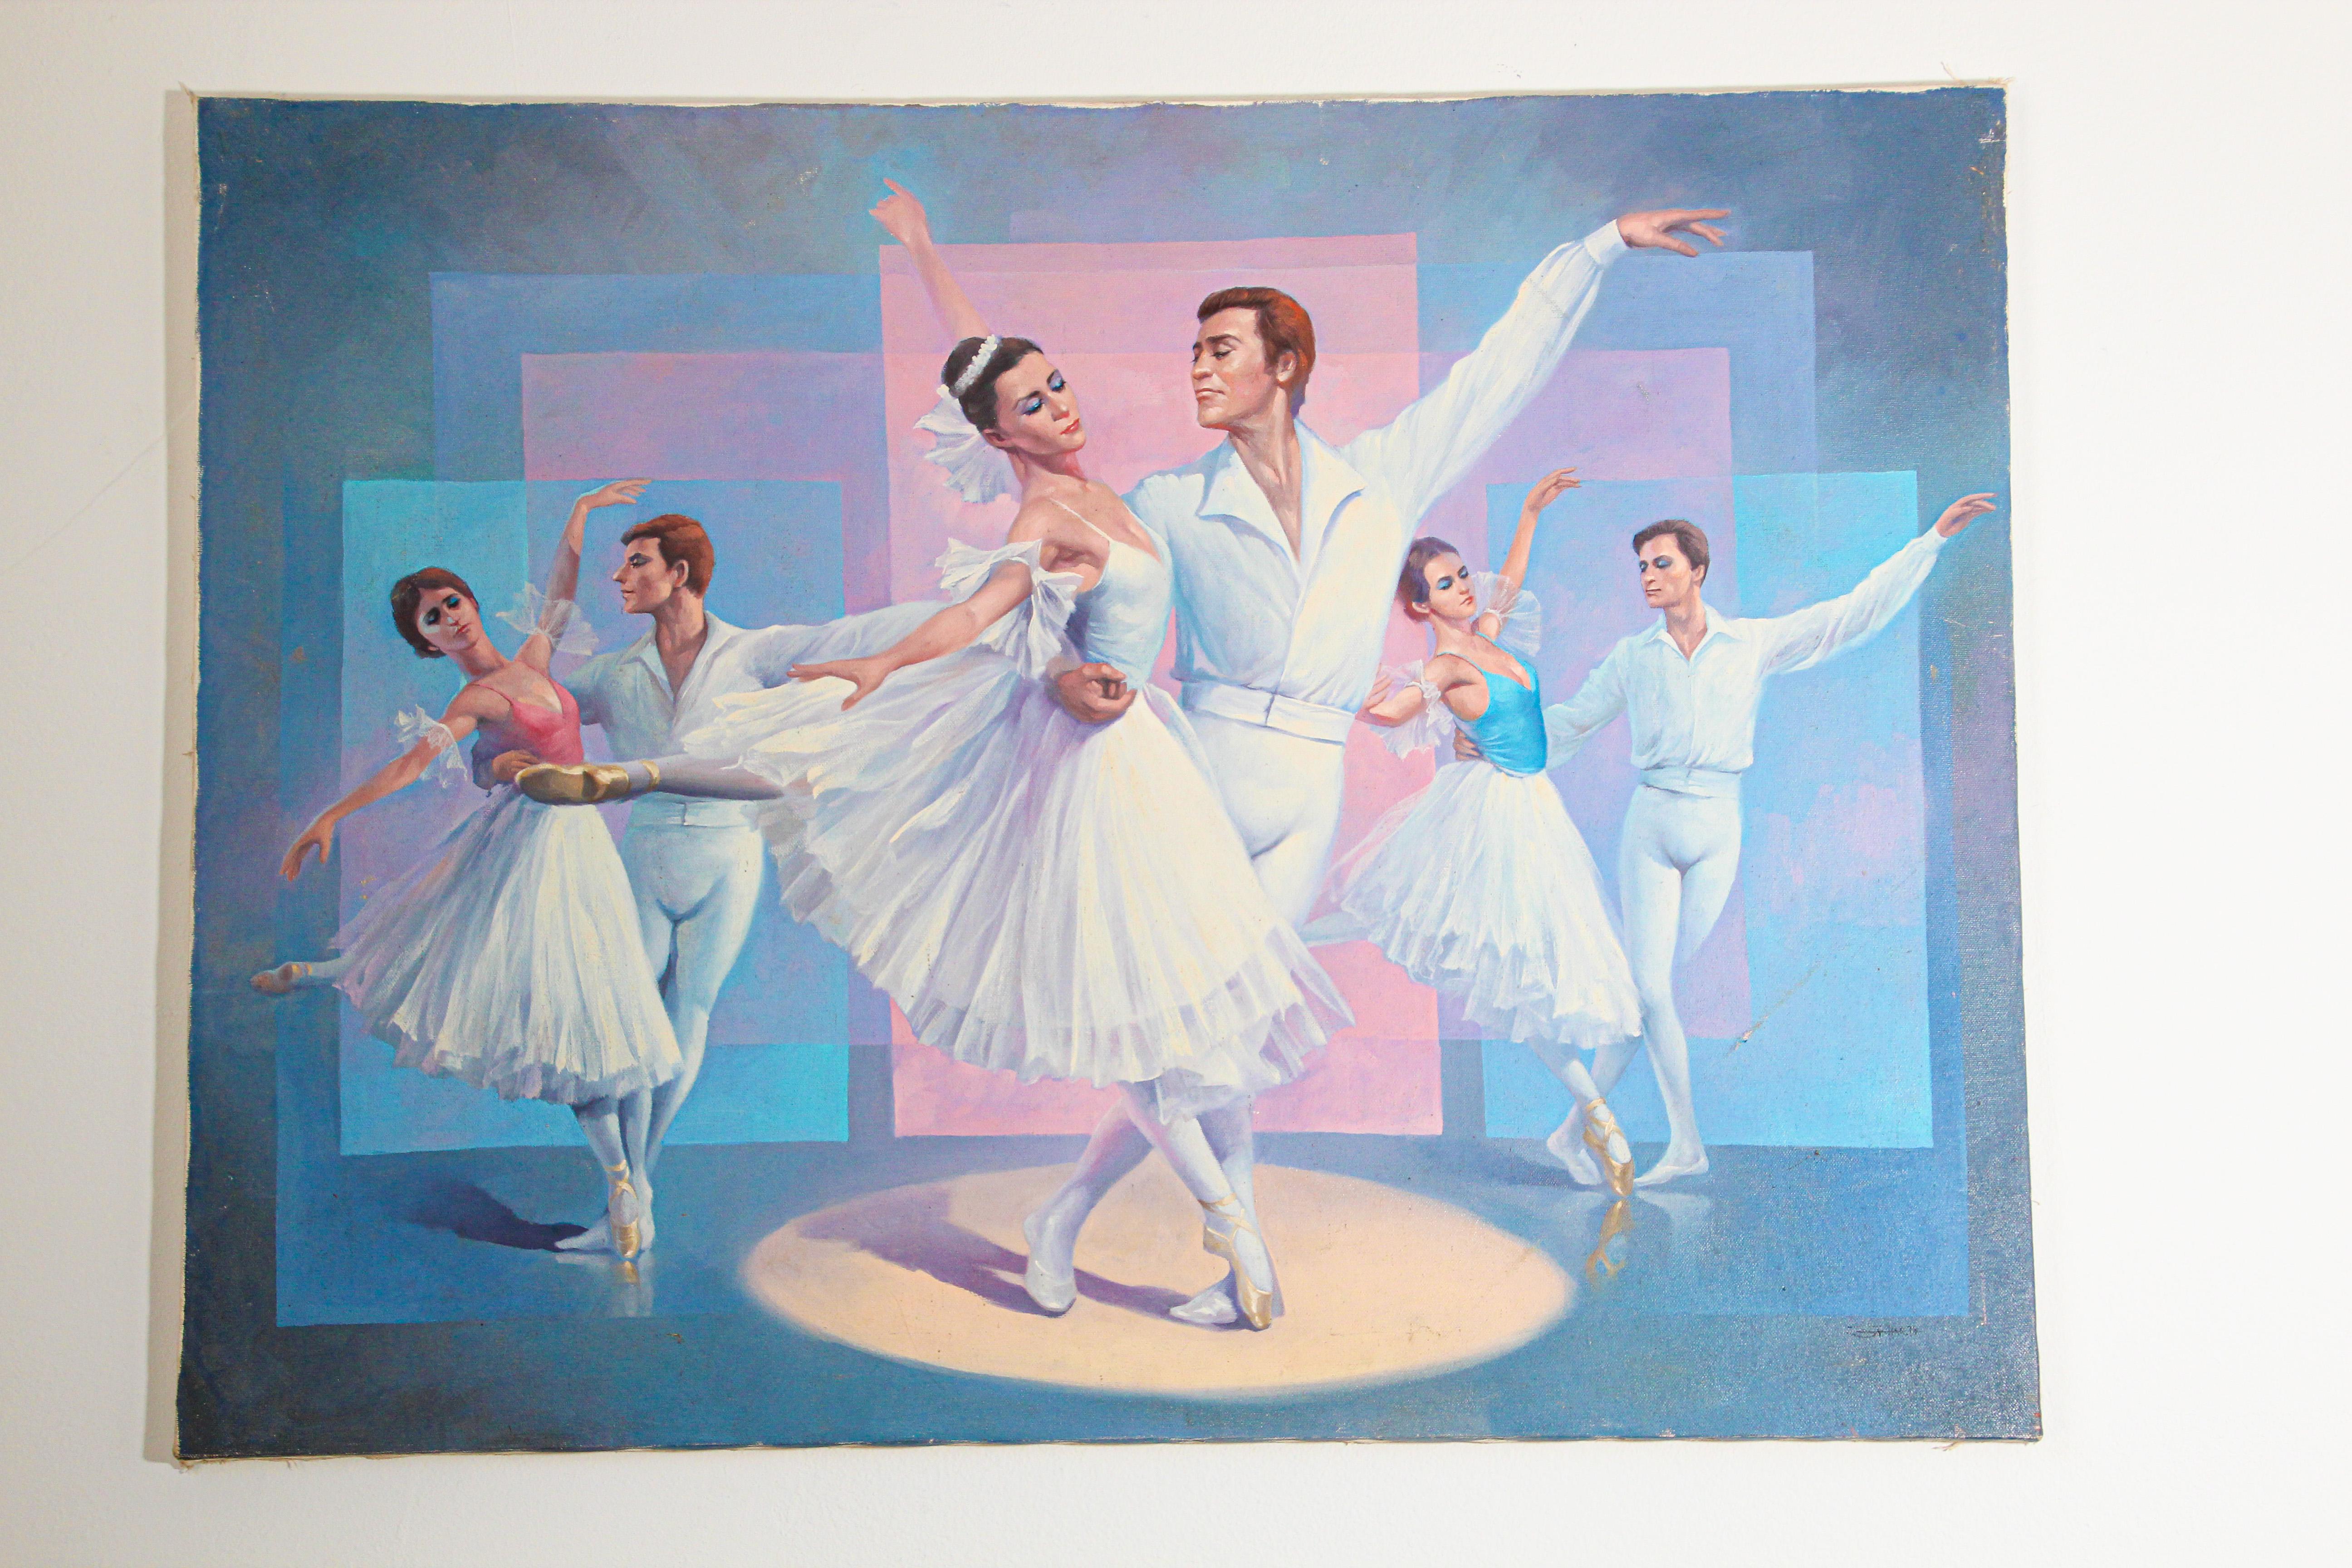 Oil painting on canvas classical ballet dancers.
Russian style classical ballet oil painting.
3 couples of ballerinas and ballet male dancers wearing white costumes and dancing,
Painting is not old, not framed, stretched canvas on wood